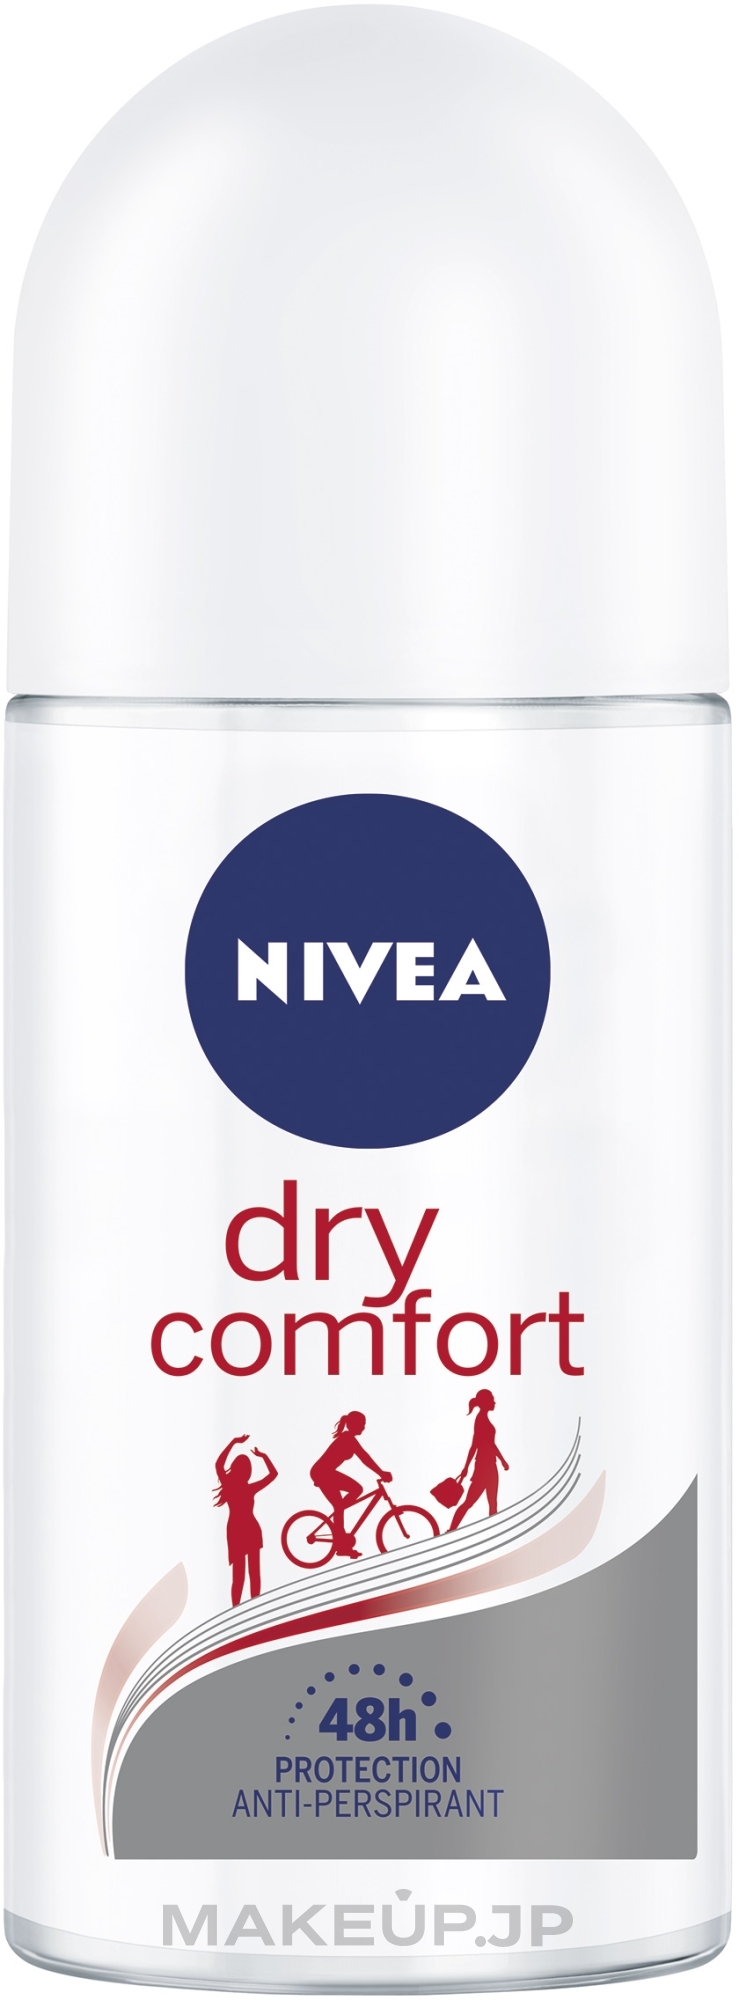 Roll-on Deodorant "Protection and Comfort" - NIVEA Deodorant Dry Comfort Plus 48H Roll-On — photo 50 ml